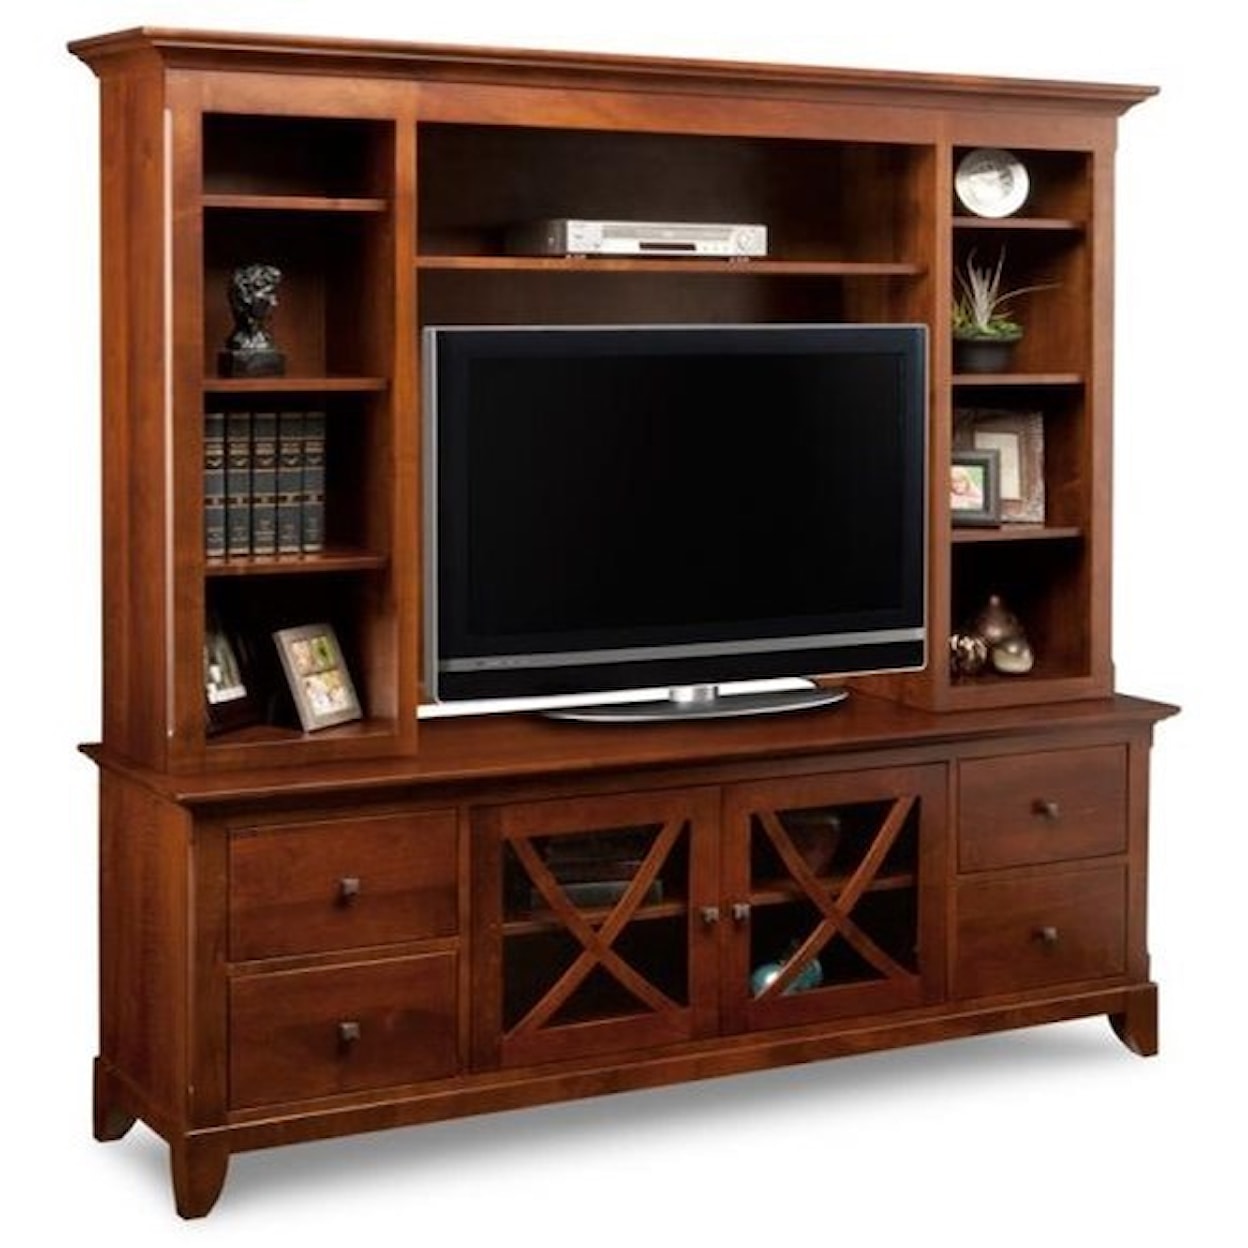 Handstone Florence 85" HDTV Cabinet with Hutch